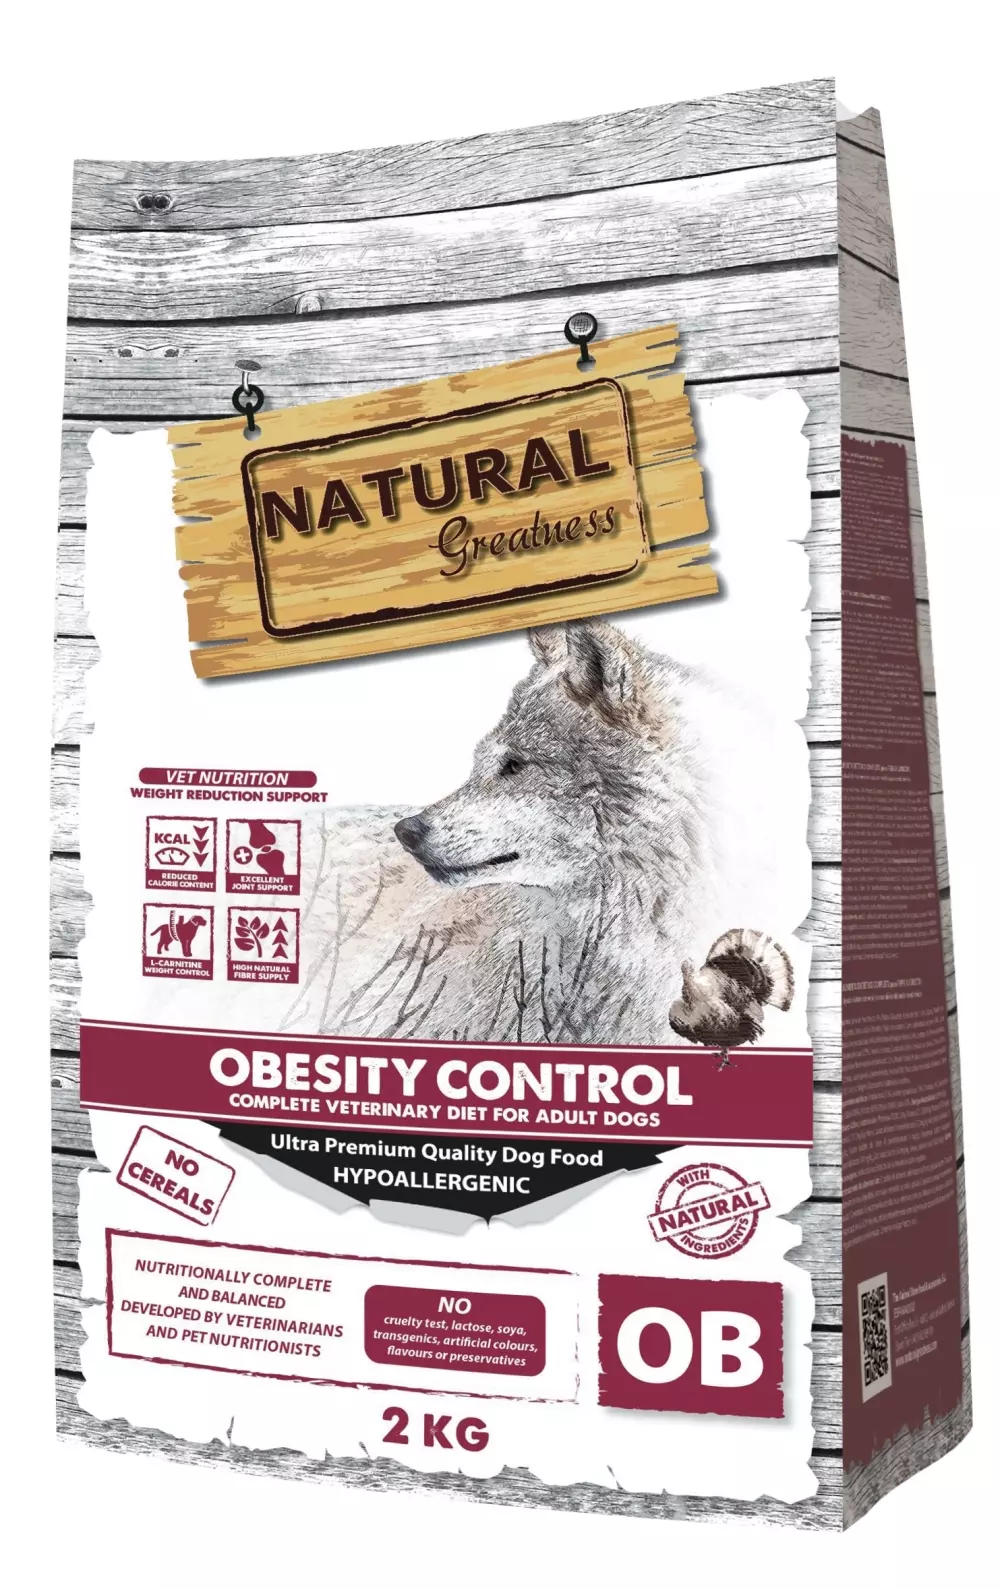 Natural Greatness Dog Obesity/Diabetic, Hundemat, Natural Greatness, Arctic Pets AS, Diet Vet Dog Obesity/Diabetic, Natural Greatness Diet Vet Dog Obesity/Diabetic 2 kg, 8425402686645, Natural Greatness Diet Vet Dog Obesity/Diabetic 6 kg, 8425402686706